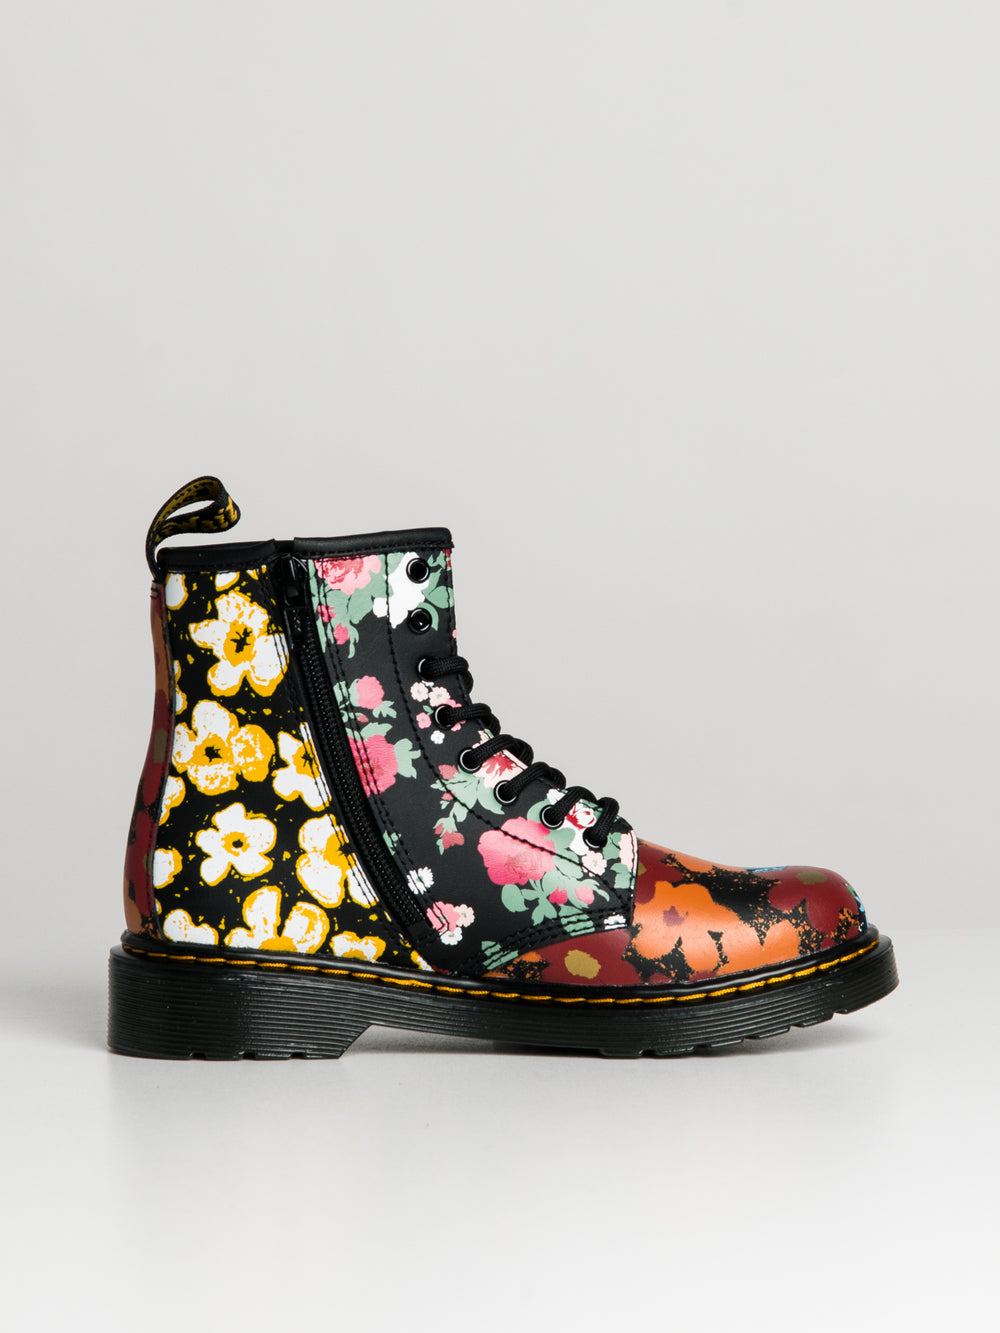 DR MARTENS KIDS 1460 FLORAL MASH UP HYDRO BOOTS - CLEARANCE